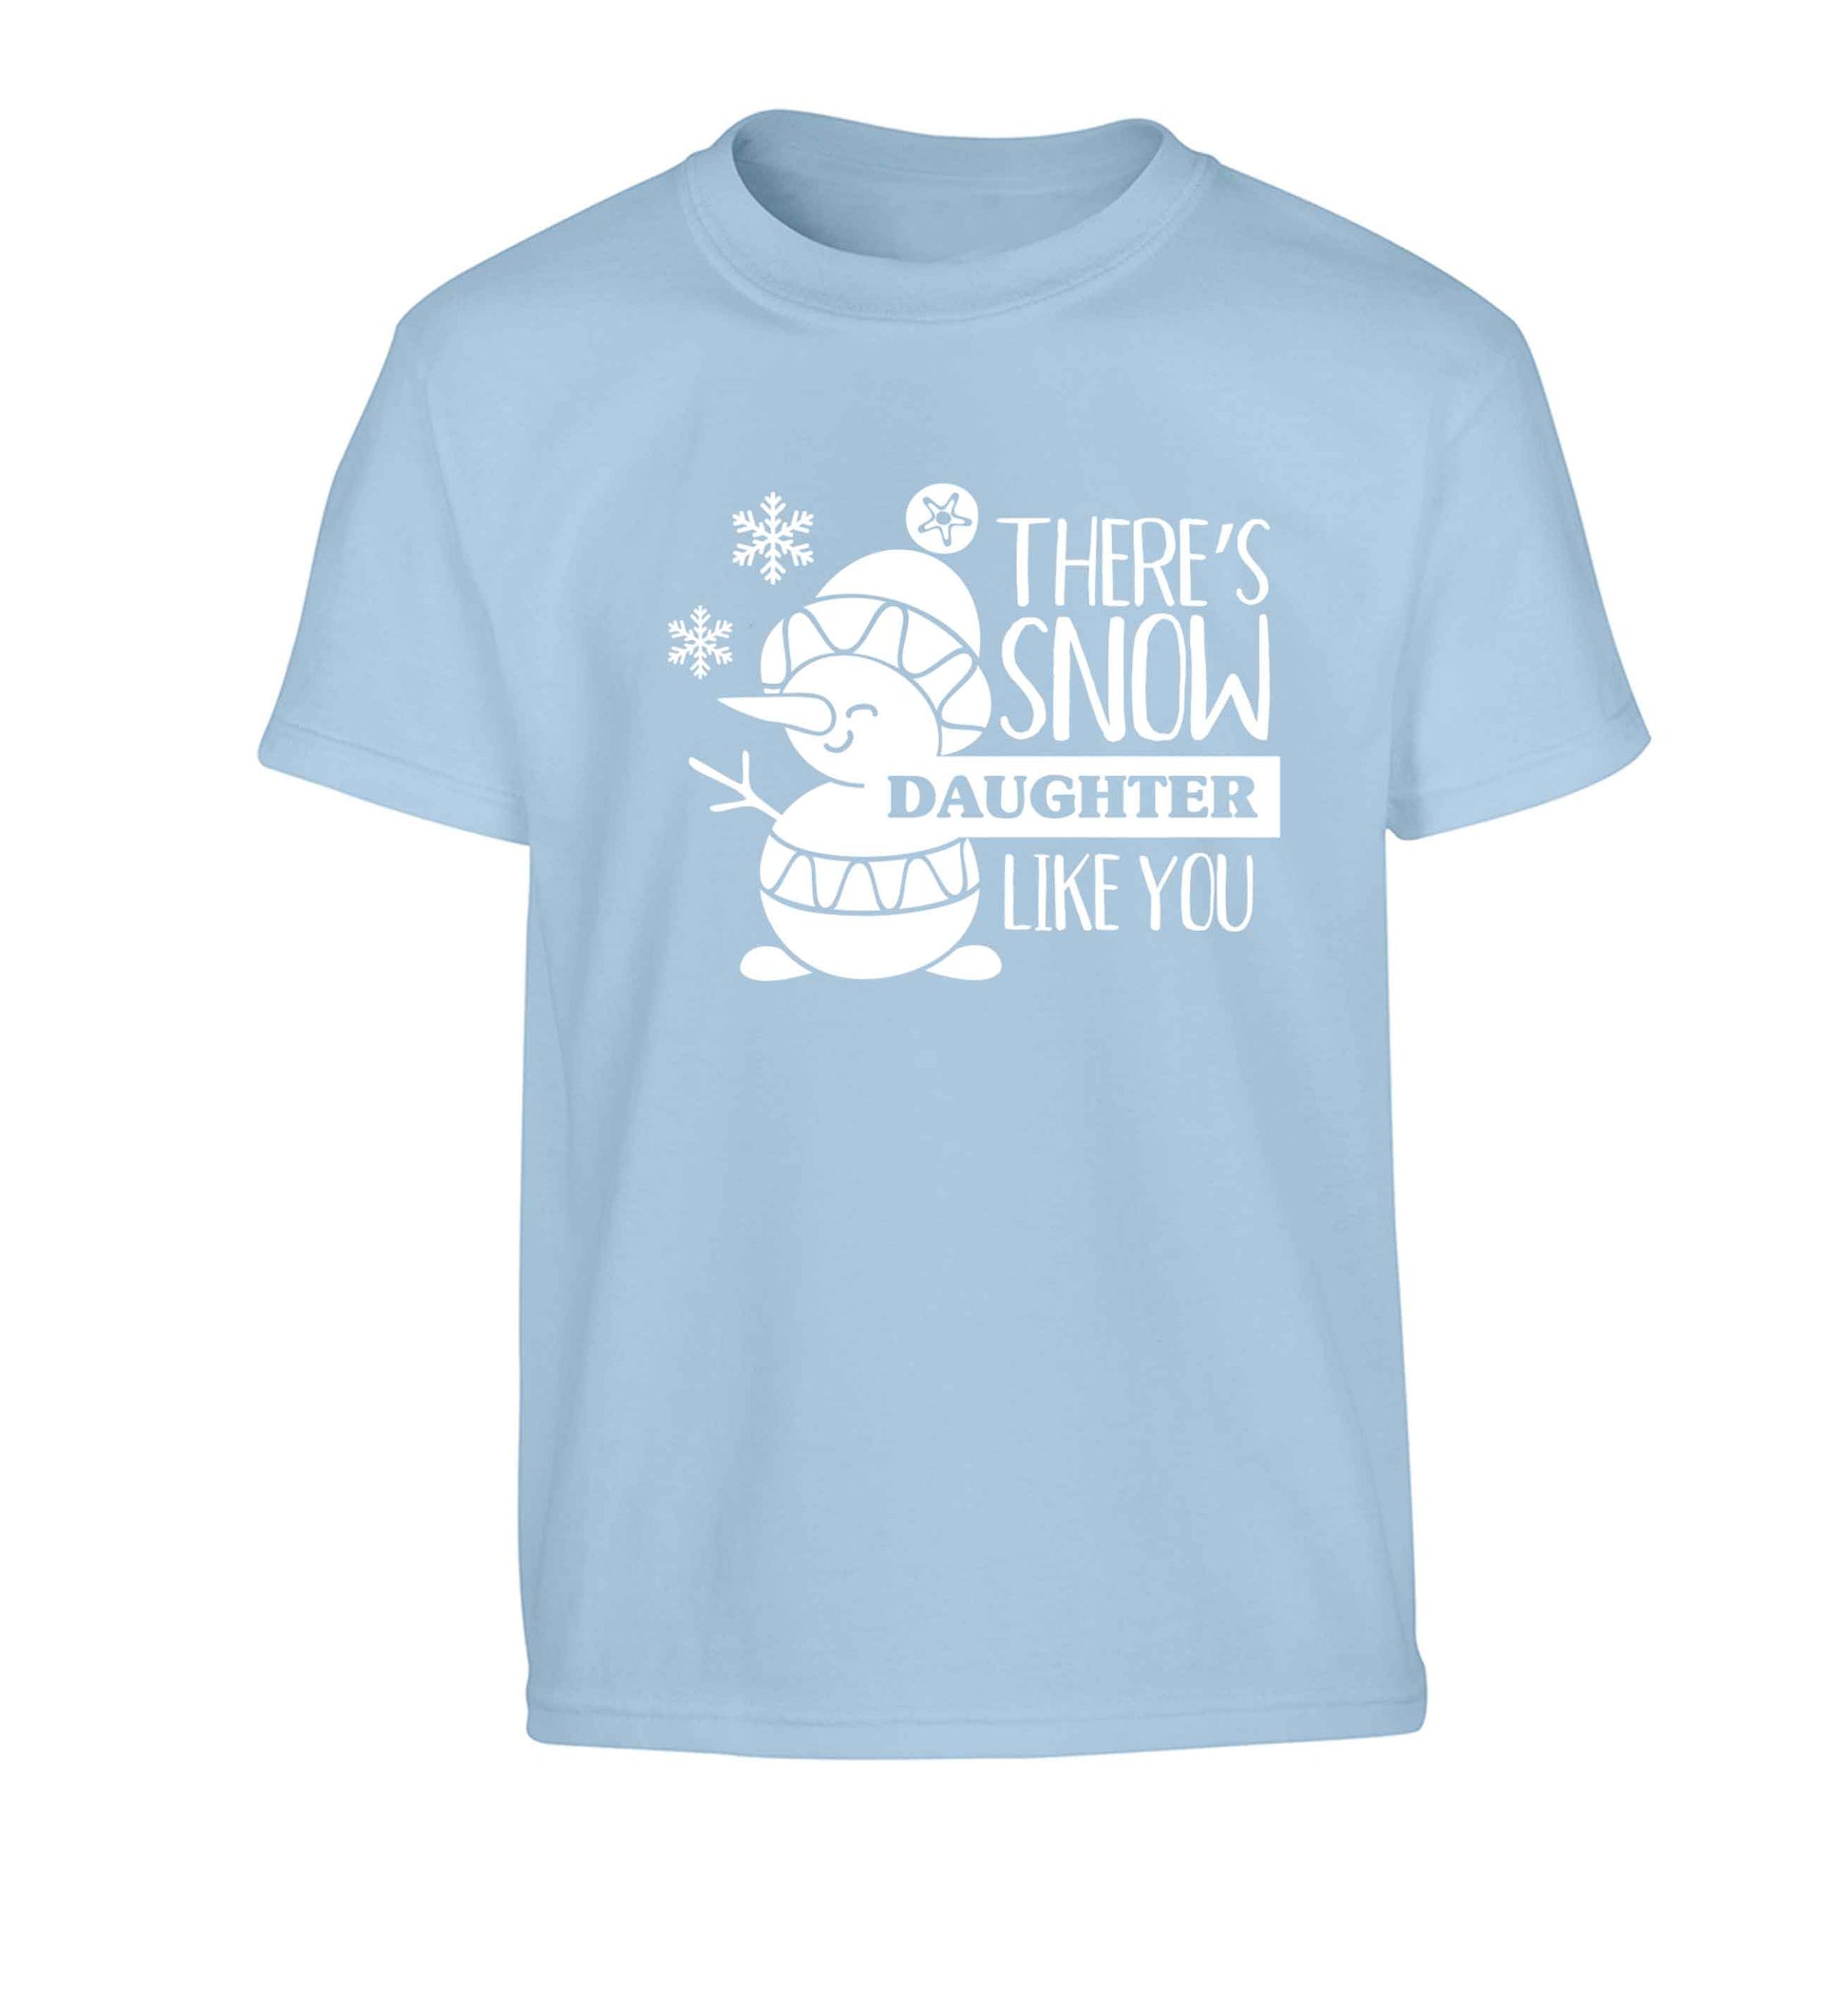 There's snow daughter like you Children's light blue Tshirt 12-13 Years